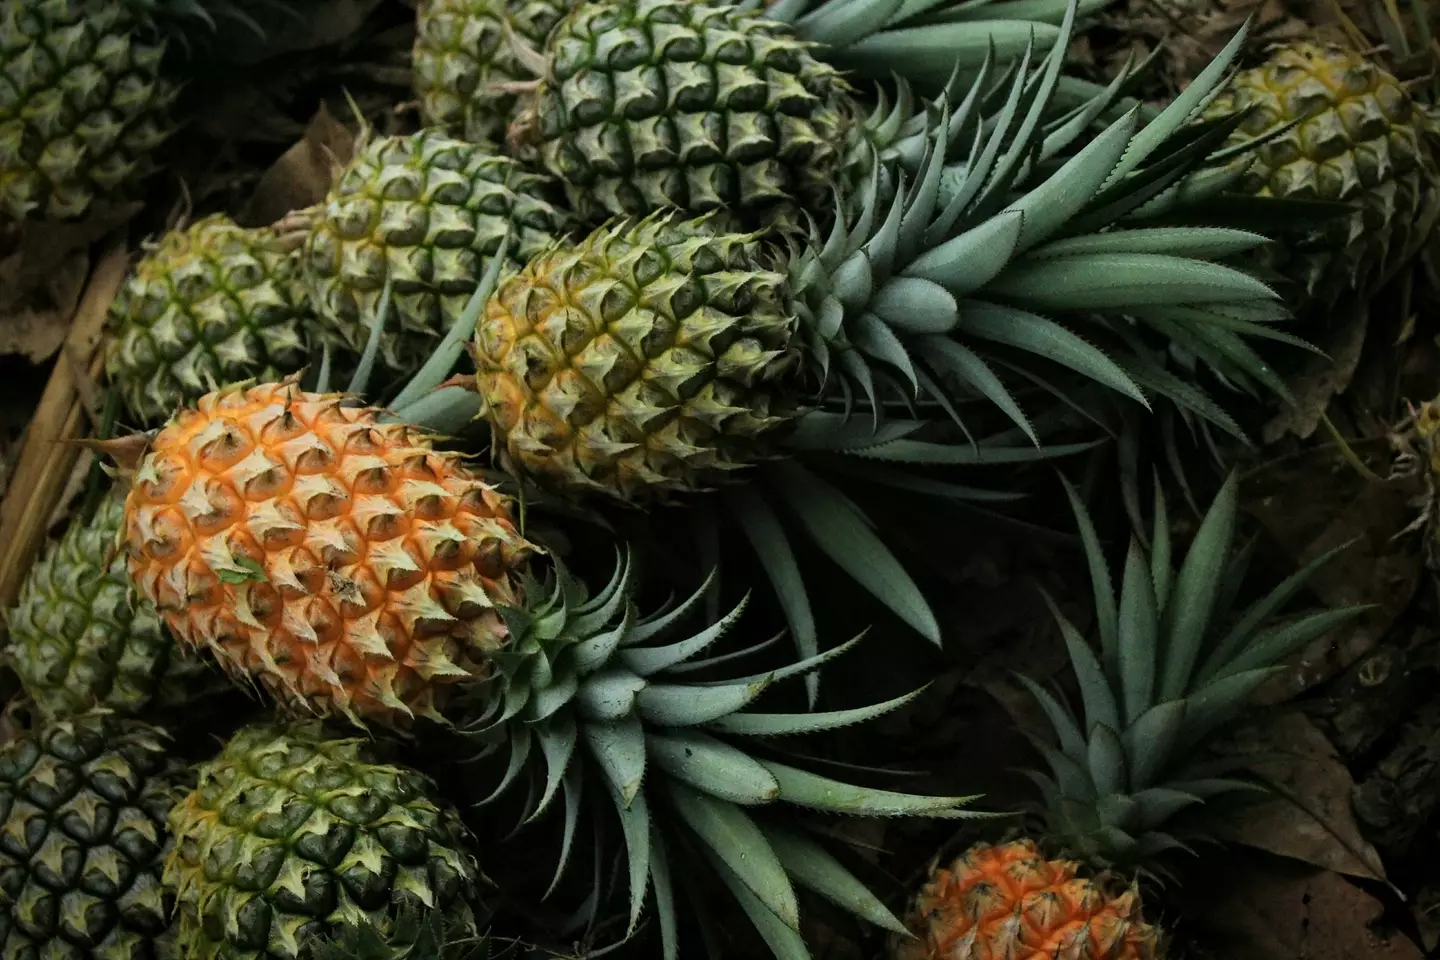 Pineapples hold all sorts of meaning.